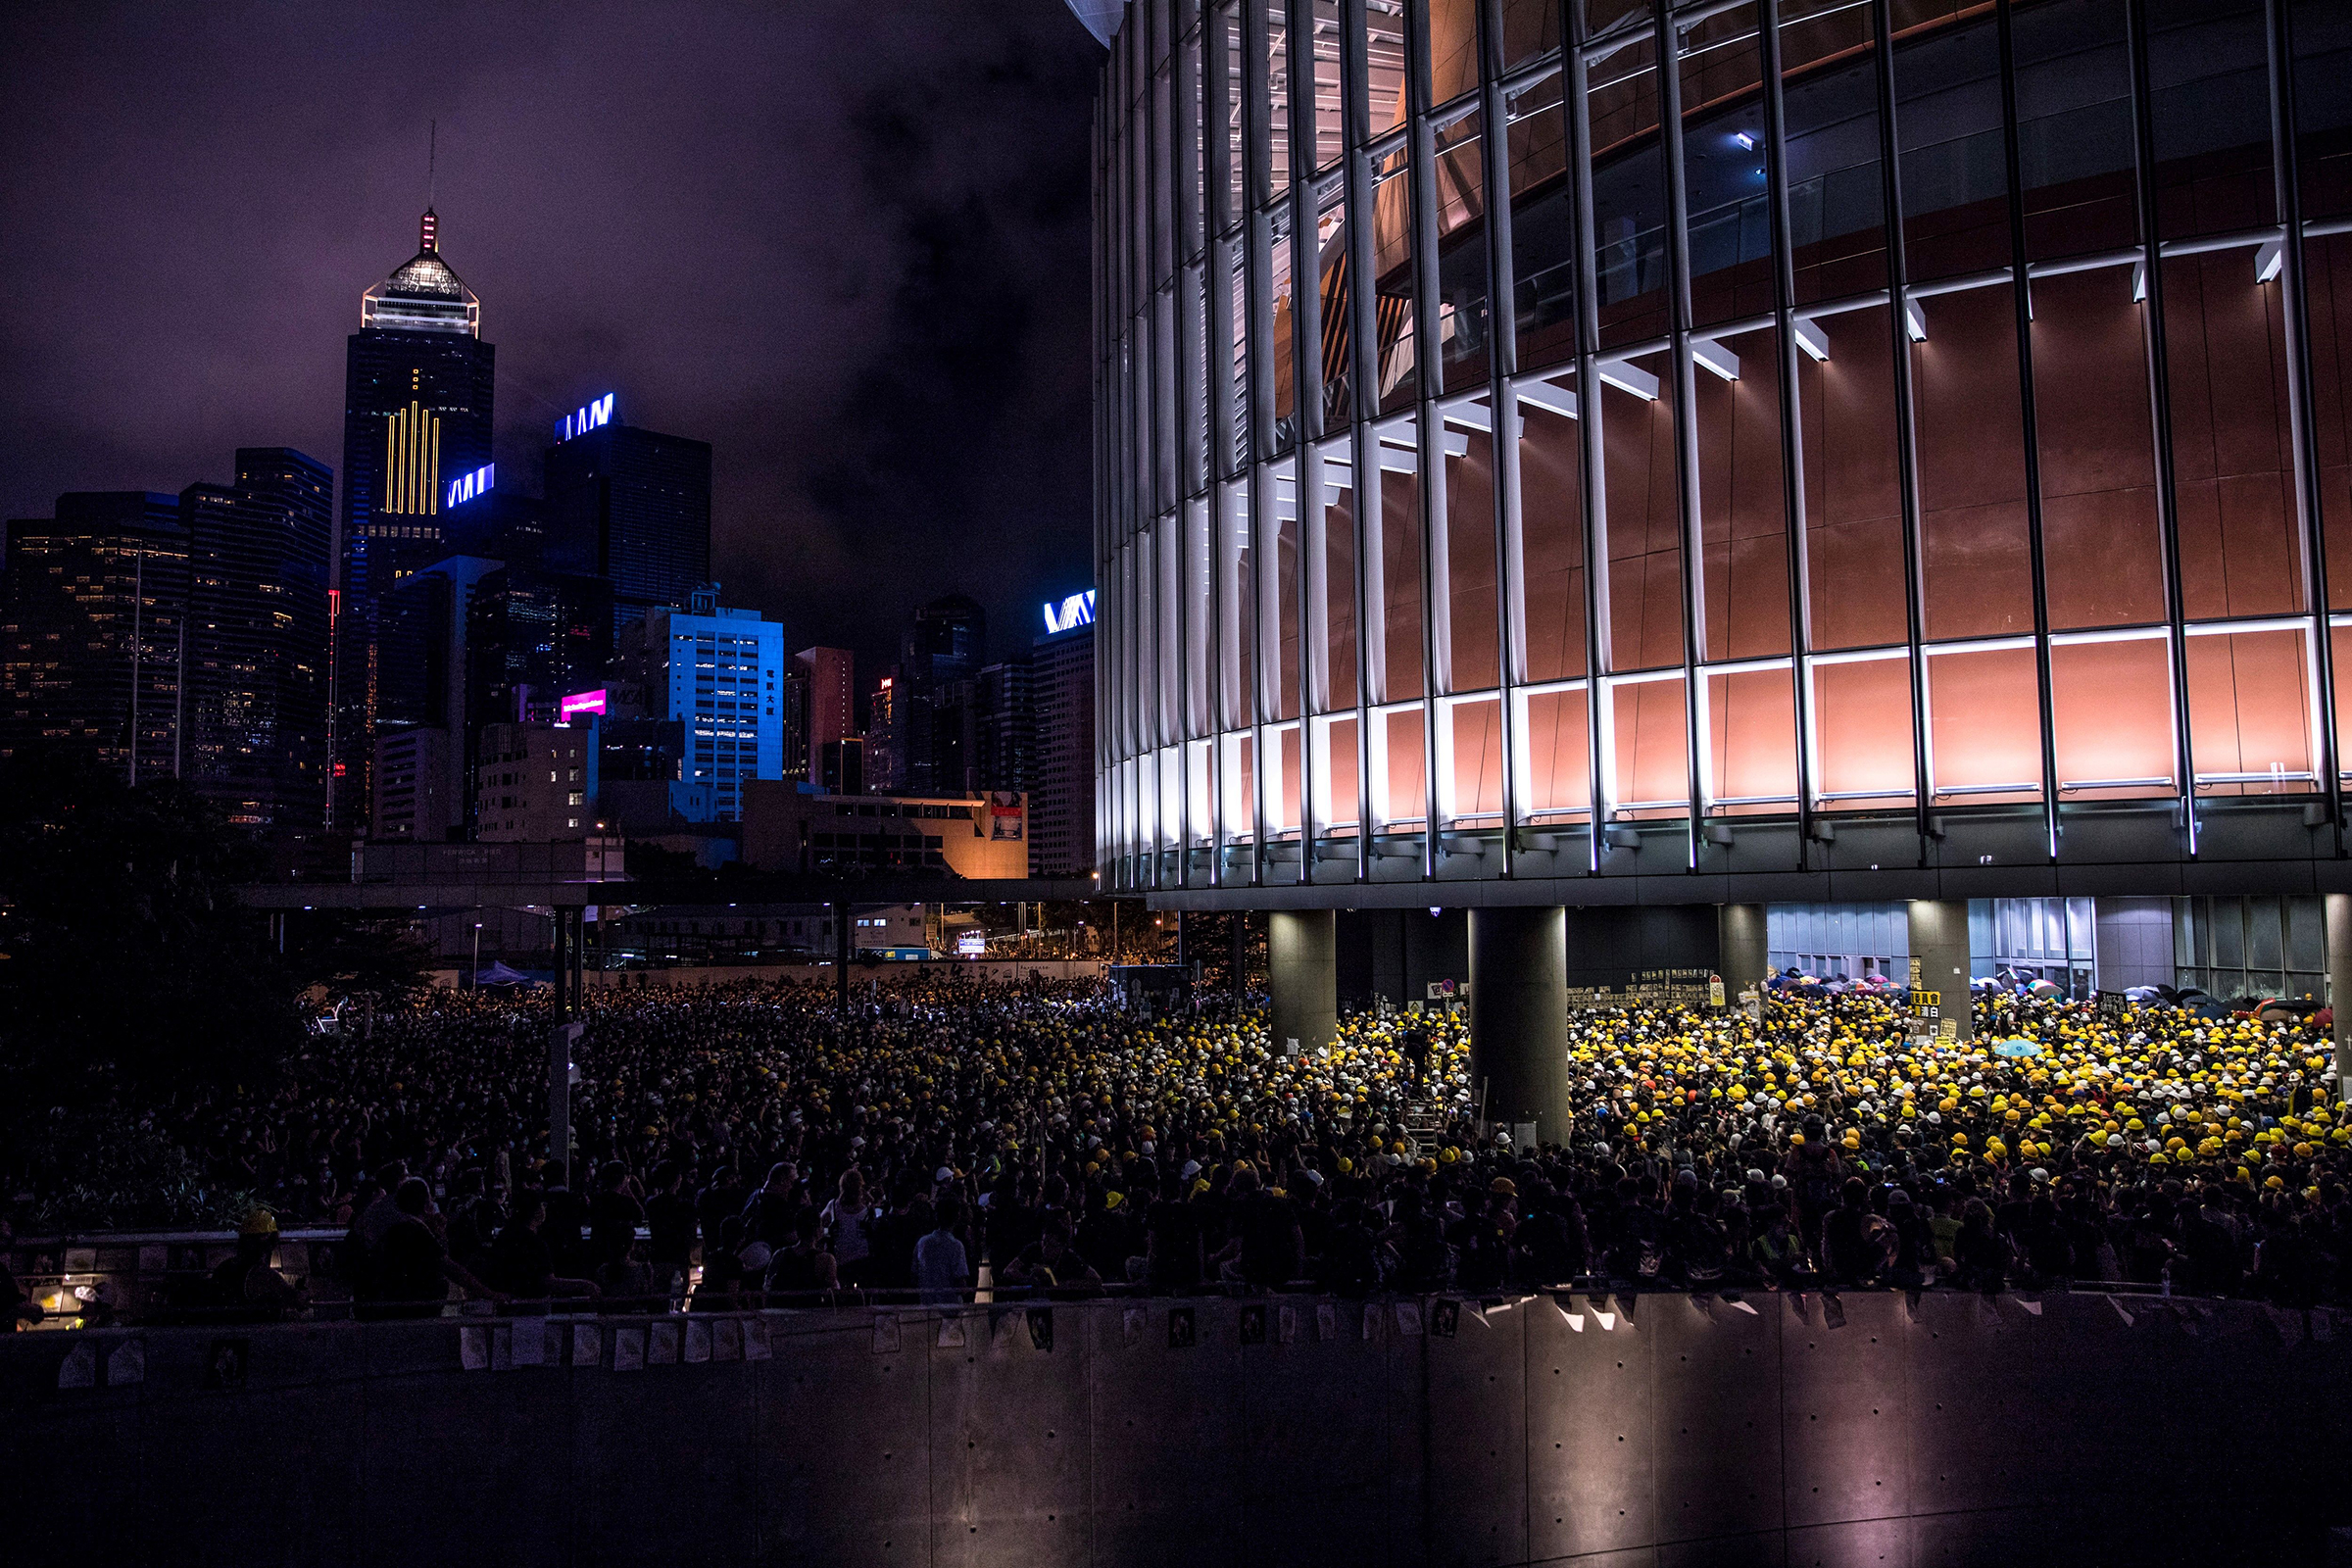 Protesters gathered outside the government headquarters in Hong Kong on July 1, 2019, on the 22nd anniversary of the city's handover from Britain to China. (Dale de la Rey—AFP/Getty Images)